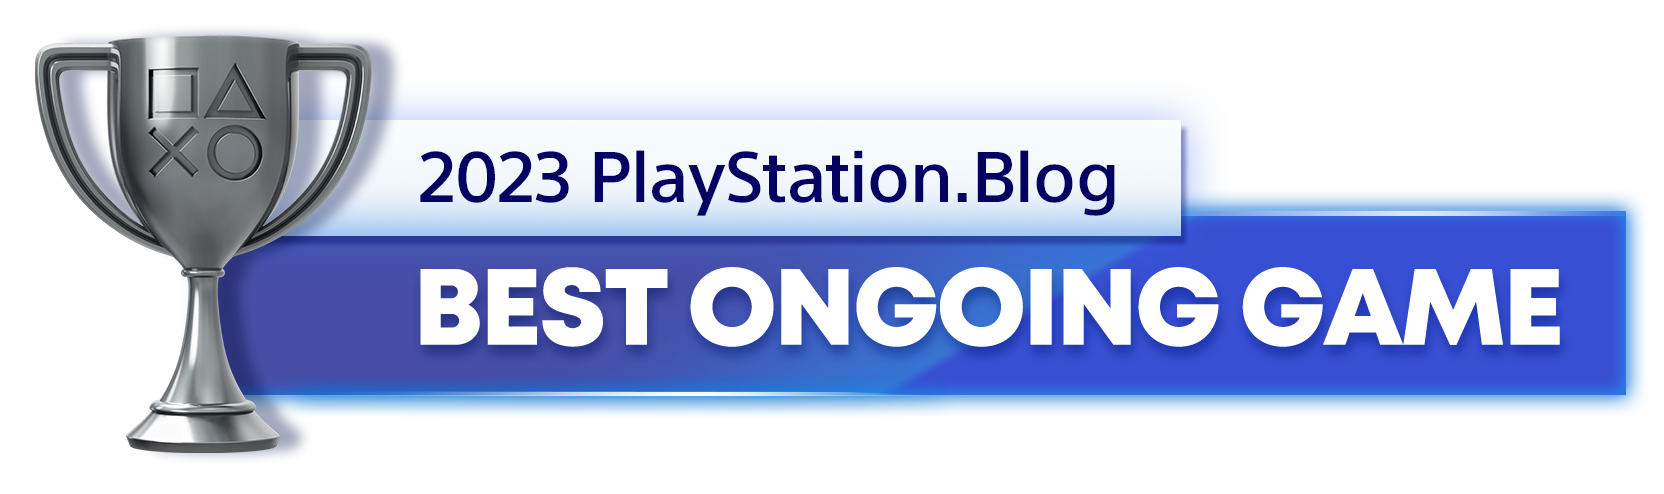  "Silver Trophy for the 2023 PlayStation Blog Best Ongoing Game Winner"